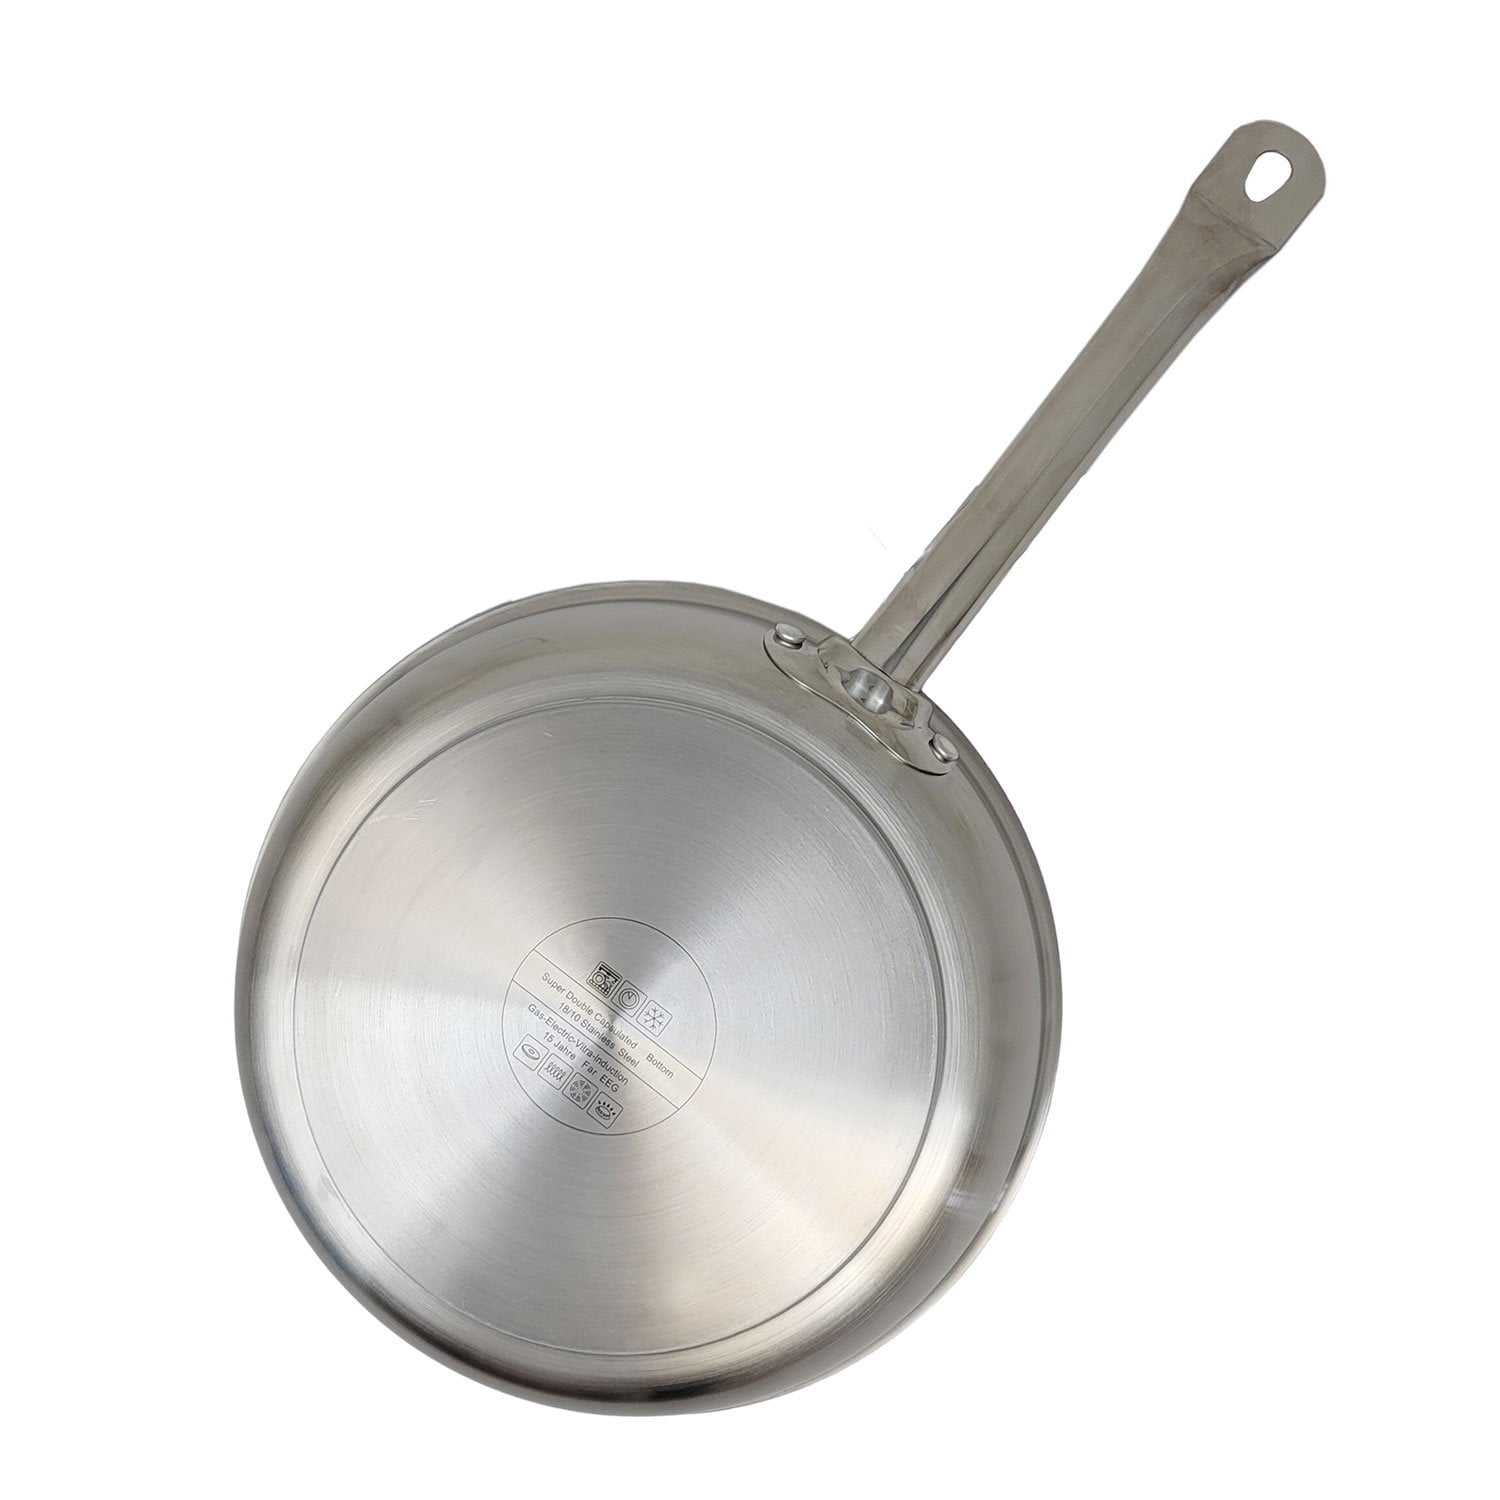  STAMBE 9.5 Stainless Steel Pan - TriPly Stainless